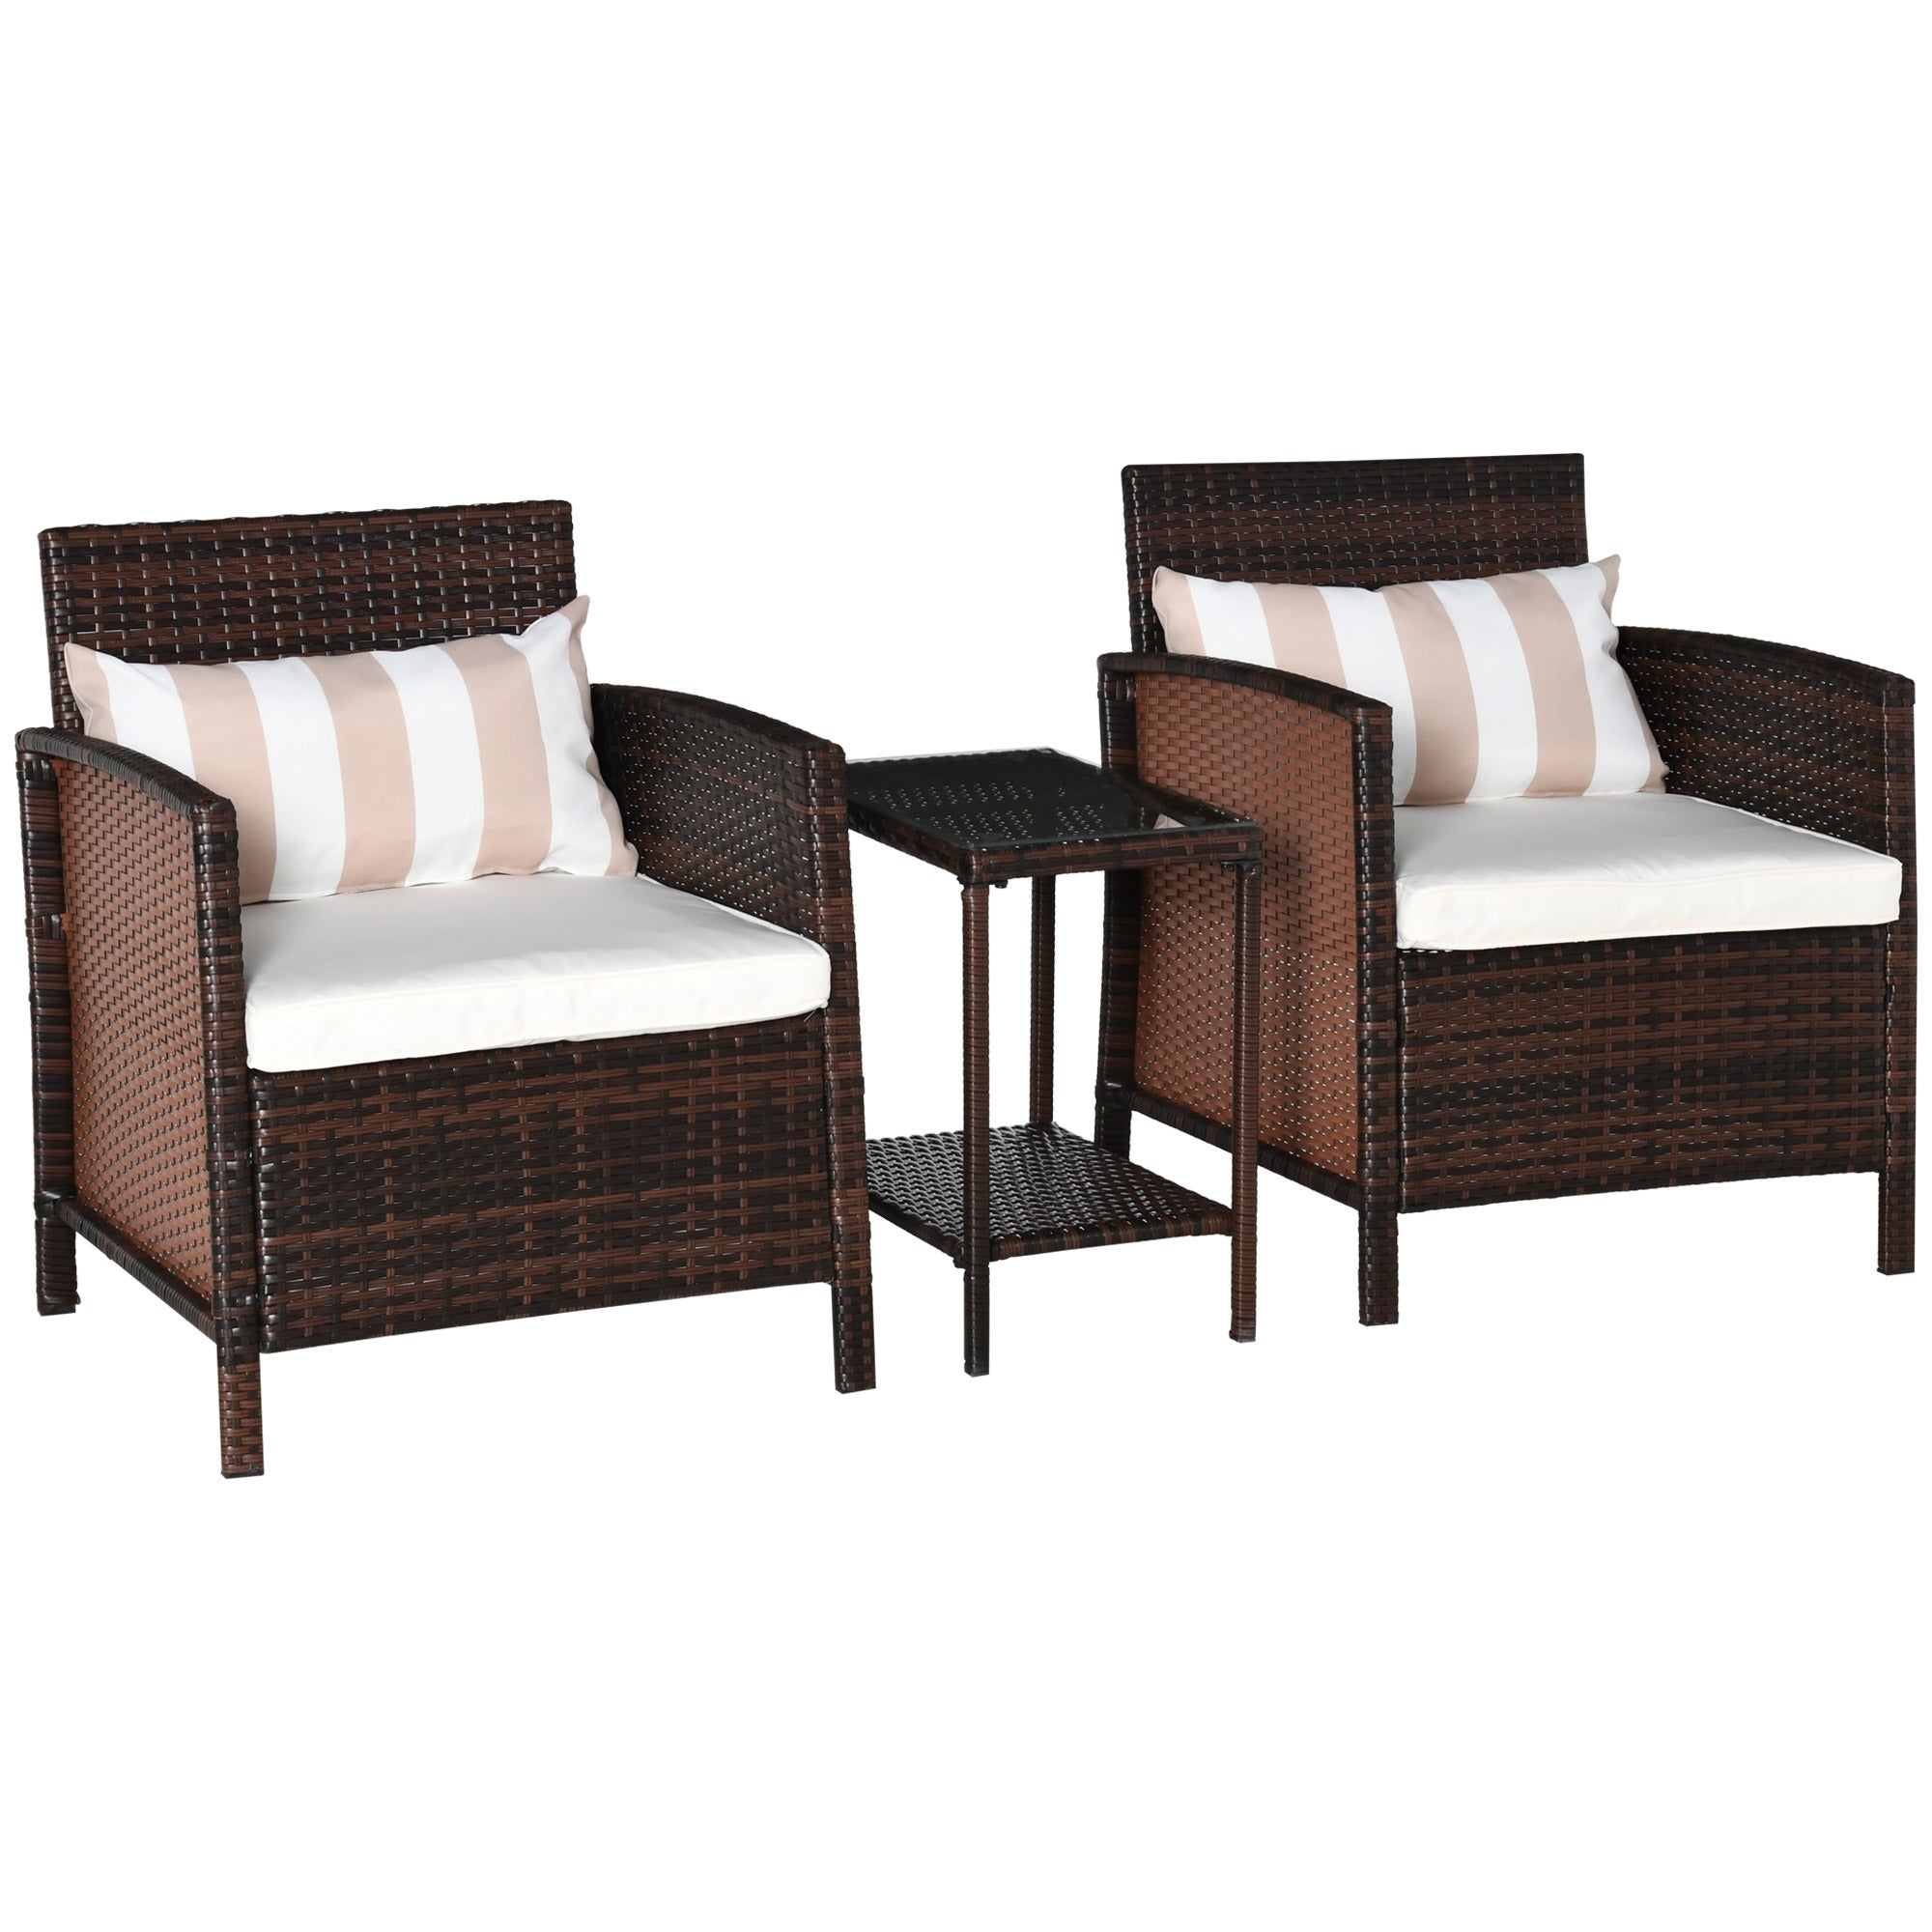 Outsunny 3 PC Outdoor Rattan Sofa Set w/ Chairs Coffee Table Cushion Brown  | TJ Hughes